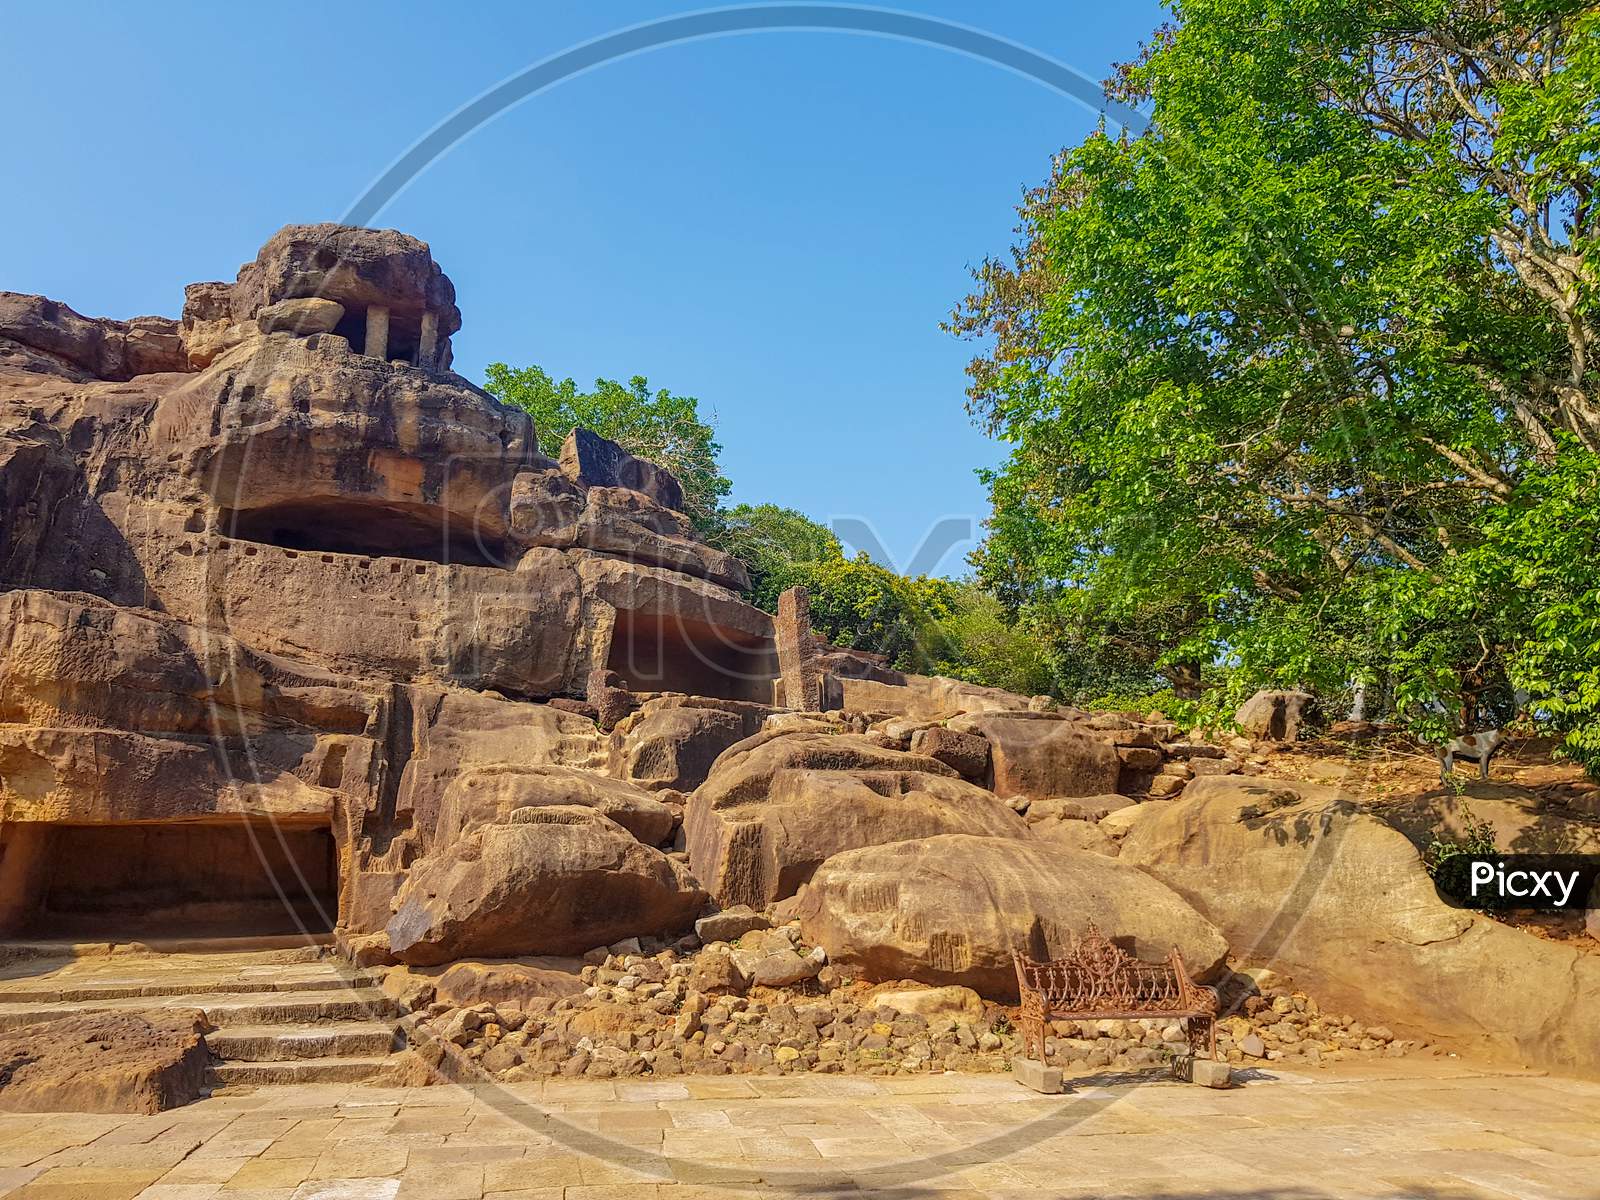 Udayagiri And Khandagiri Caves, Formerly Called Kattaka Caves Or Cuttack Caves, Are Partly Natural And Partly Artificial Caves Of Archaeological, Historical And Religious Importance Near The City Of Bhubaneswar In Odisha, India